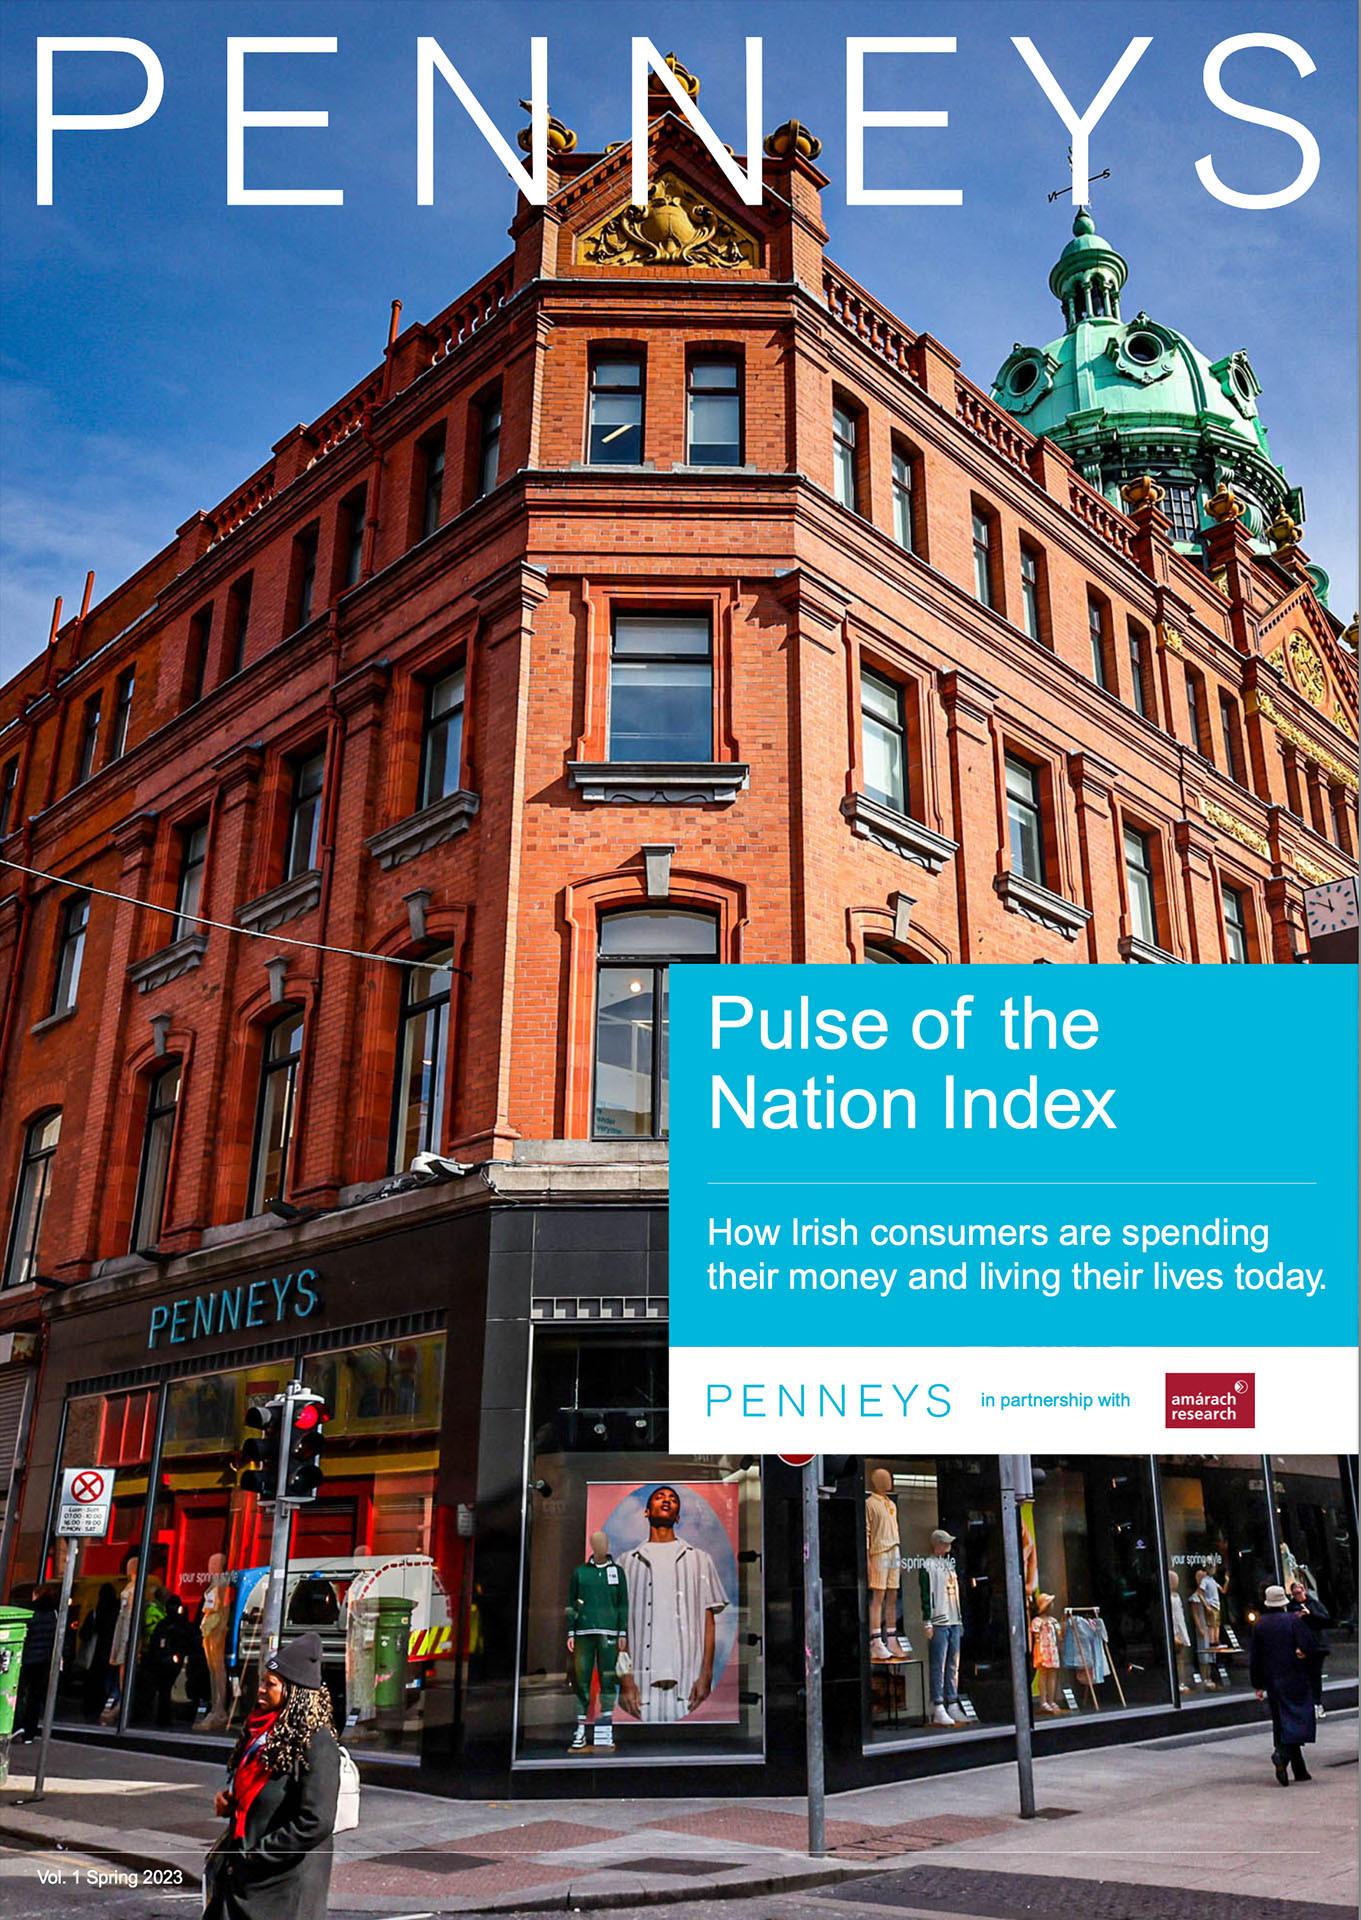 The Penneys Pulse of the Nation Index